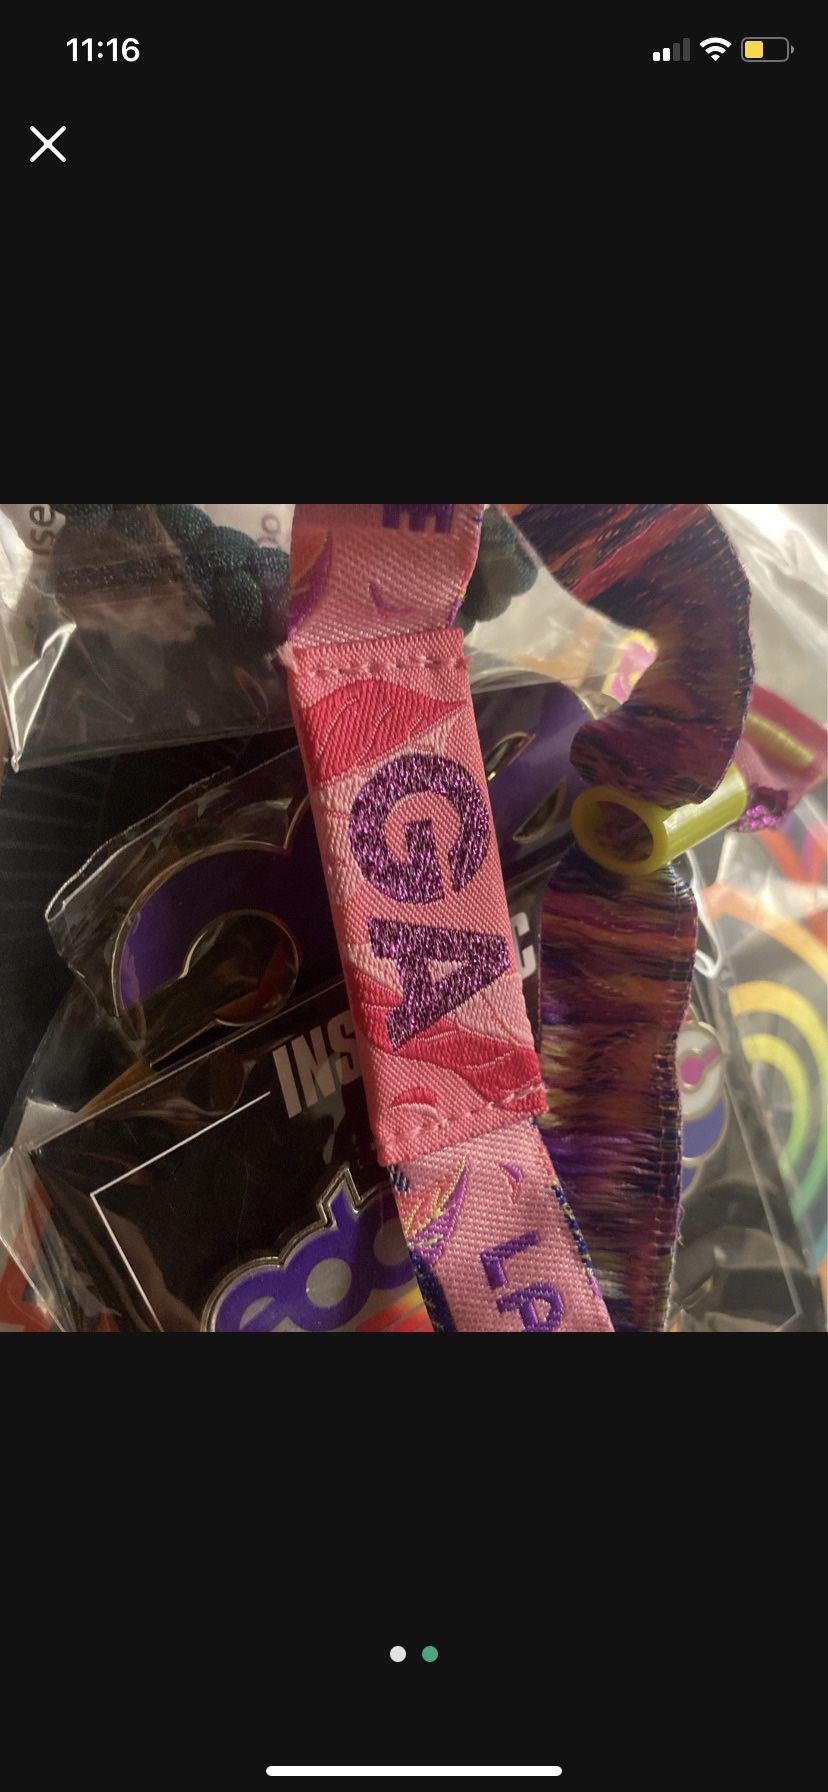 Extra EDC 3 Day Wristband For Sale (CHEAP) 